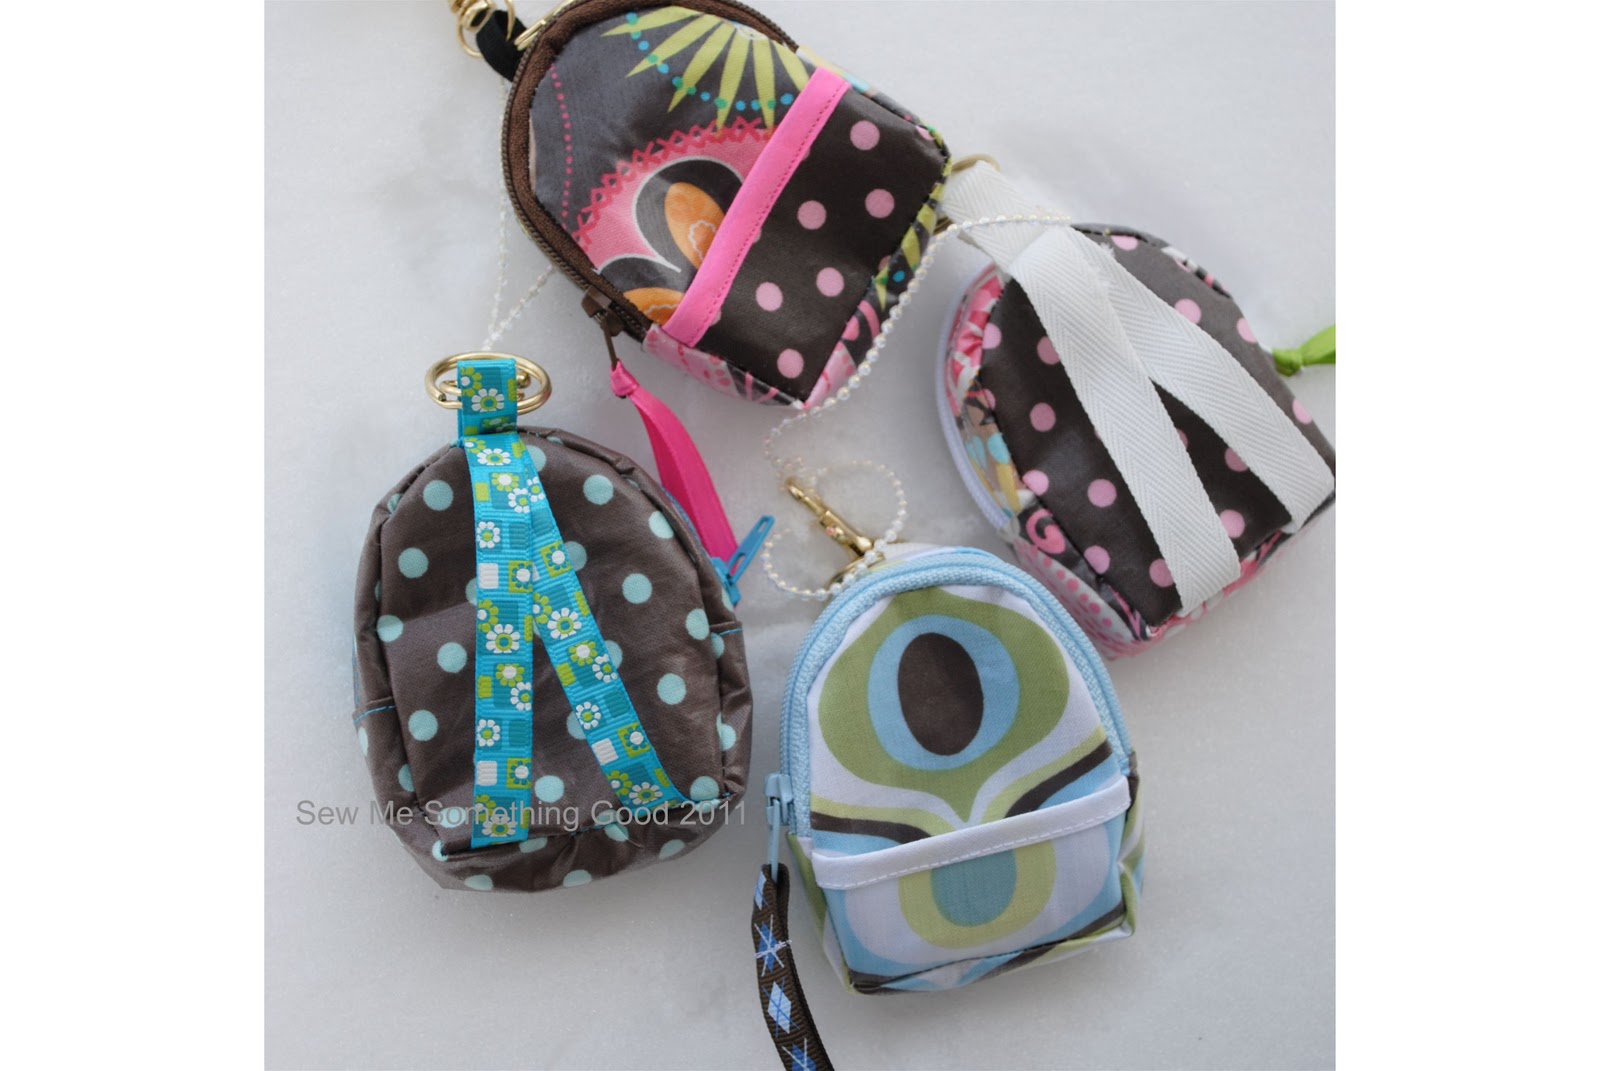 Sew Me Something Good: Make a Mini Back Pack Coin Purse and Key Chain